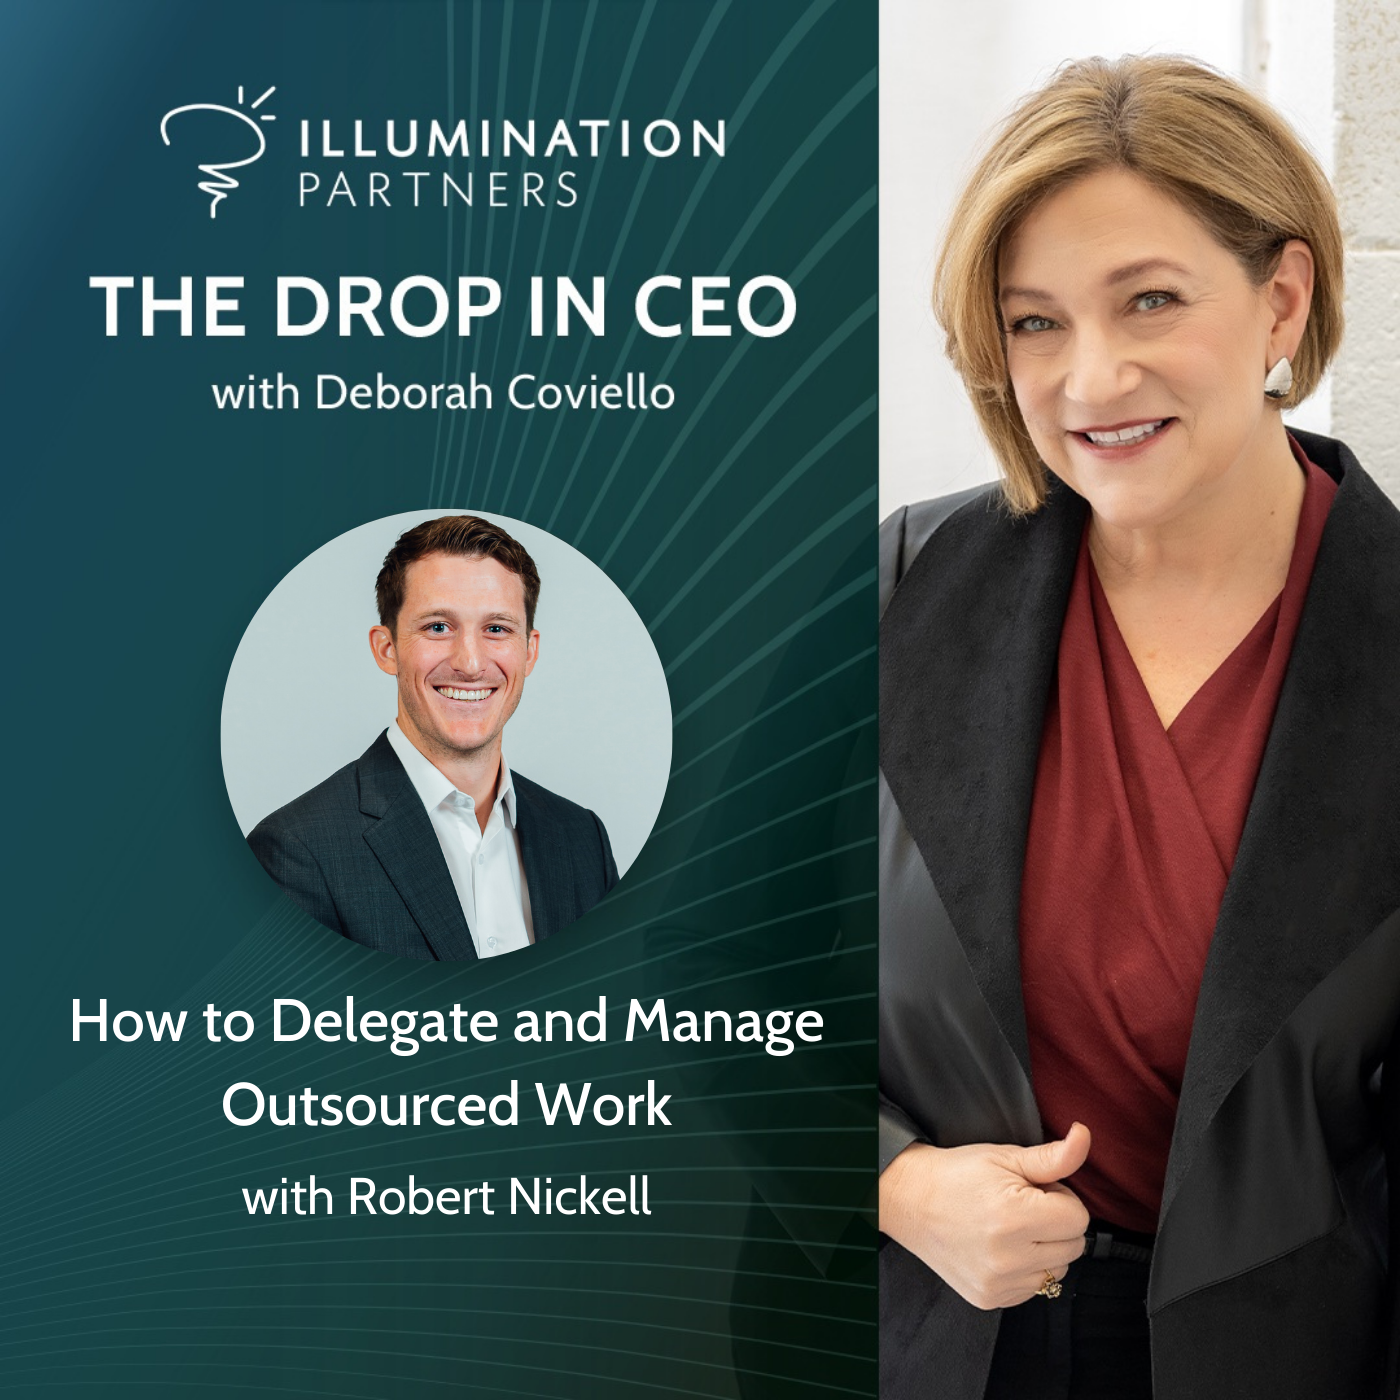 Robert Nickell: How to Delegate and Manage Outsourced Work